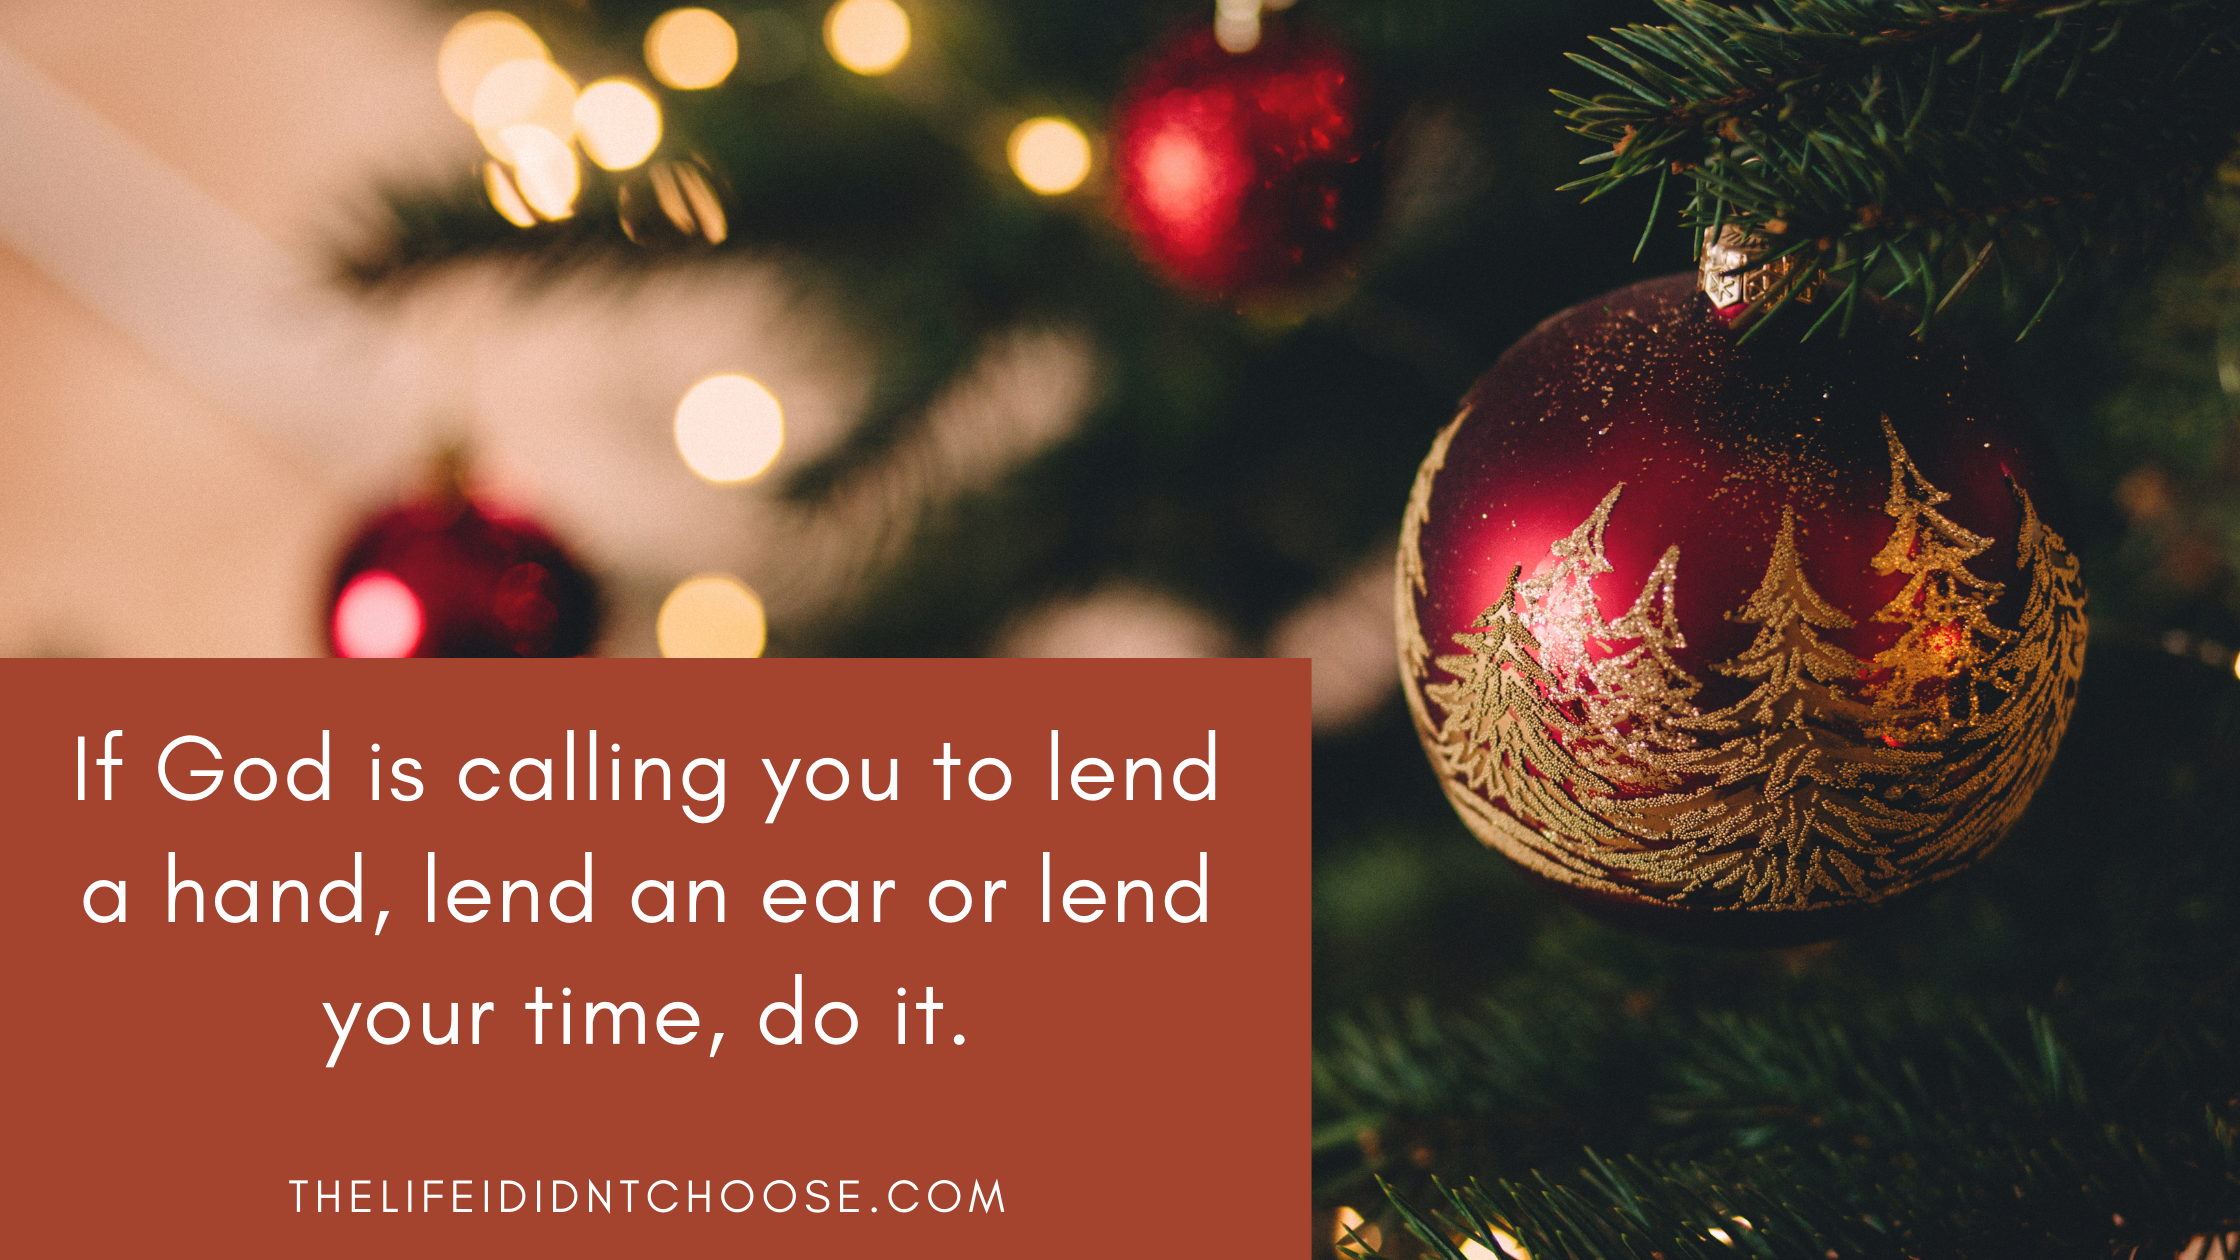 If God is calling you to lend a hand, lend an ear or lend your time, do it.